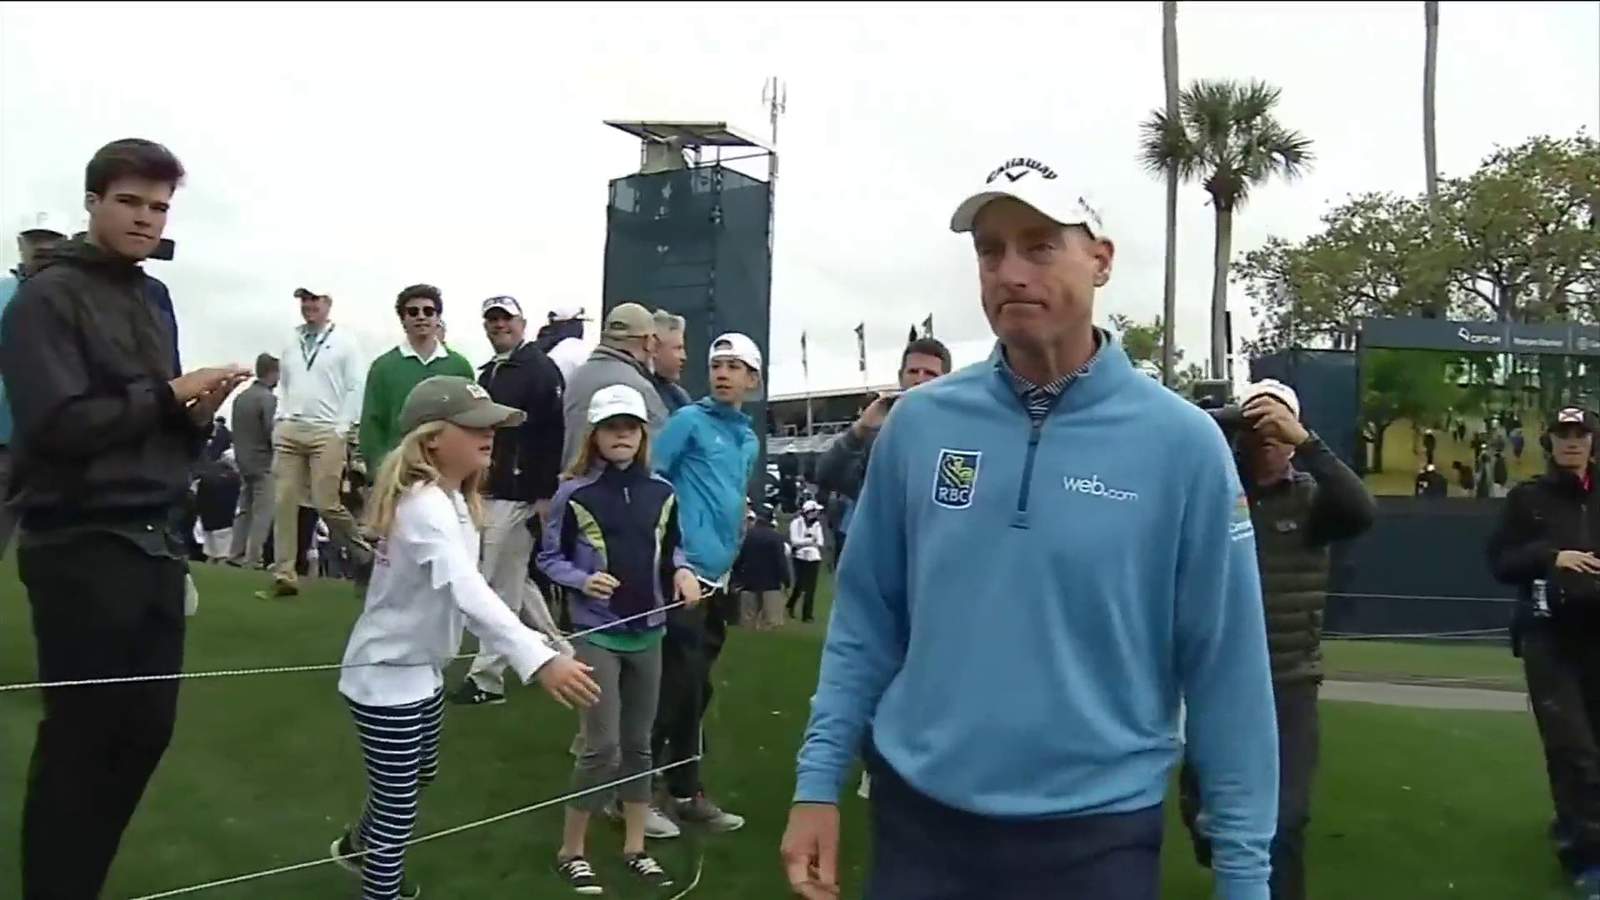 Furyk’s $100K donation goes to help Baptist healthcare workers